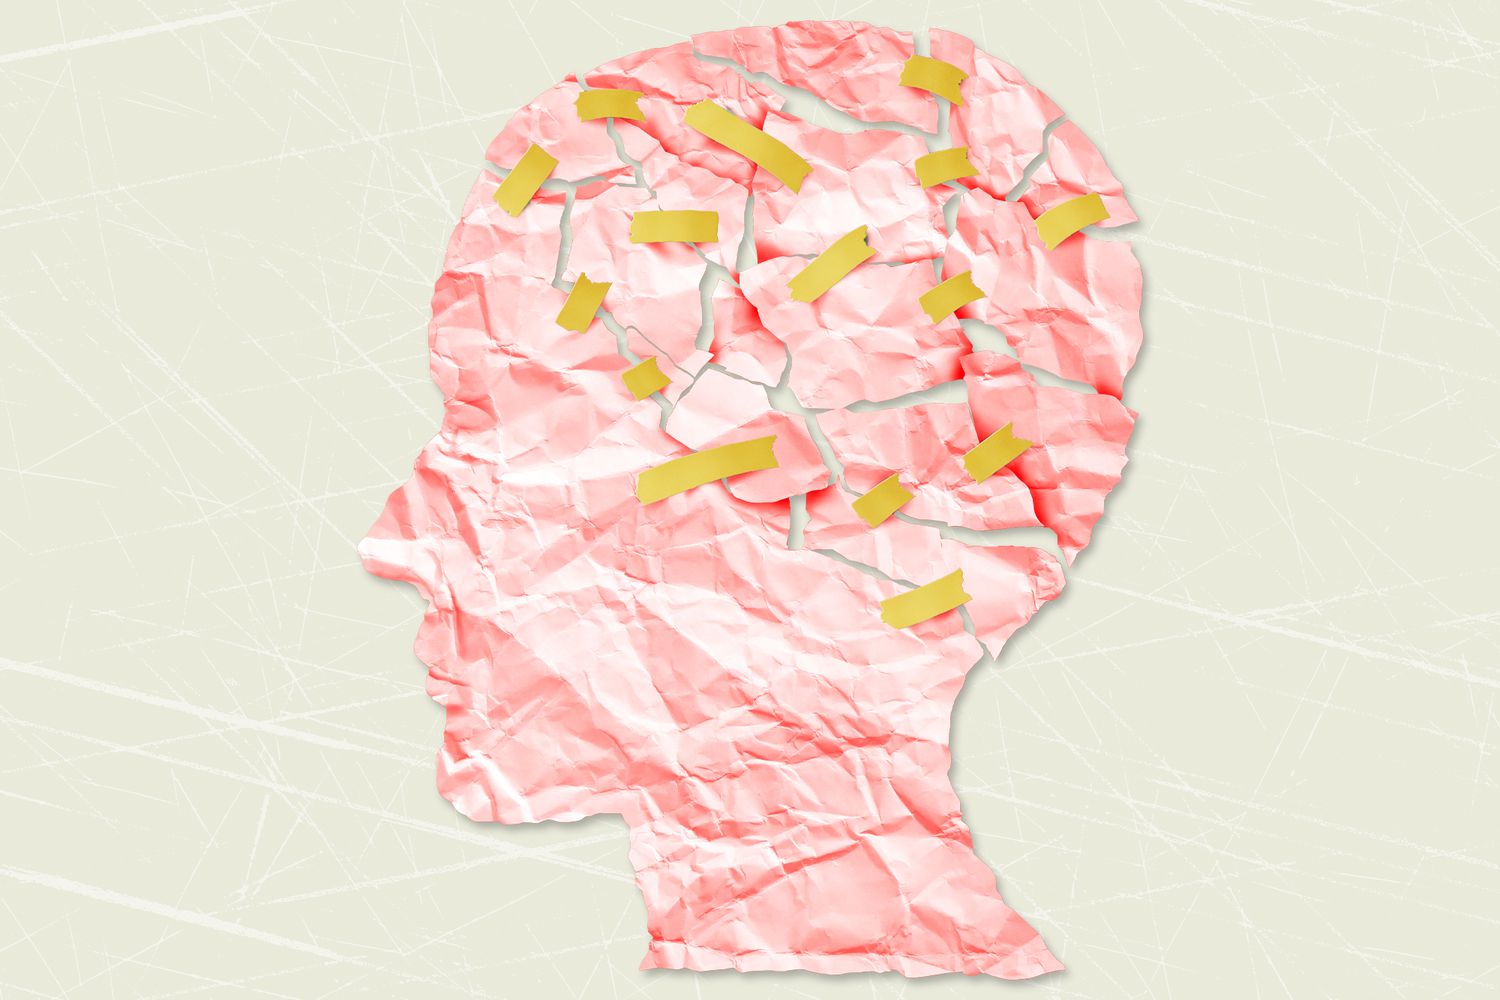 A paper cut of of a head that has been torn and taped back together on a designed background